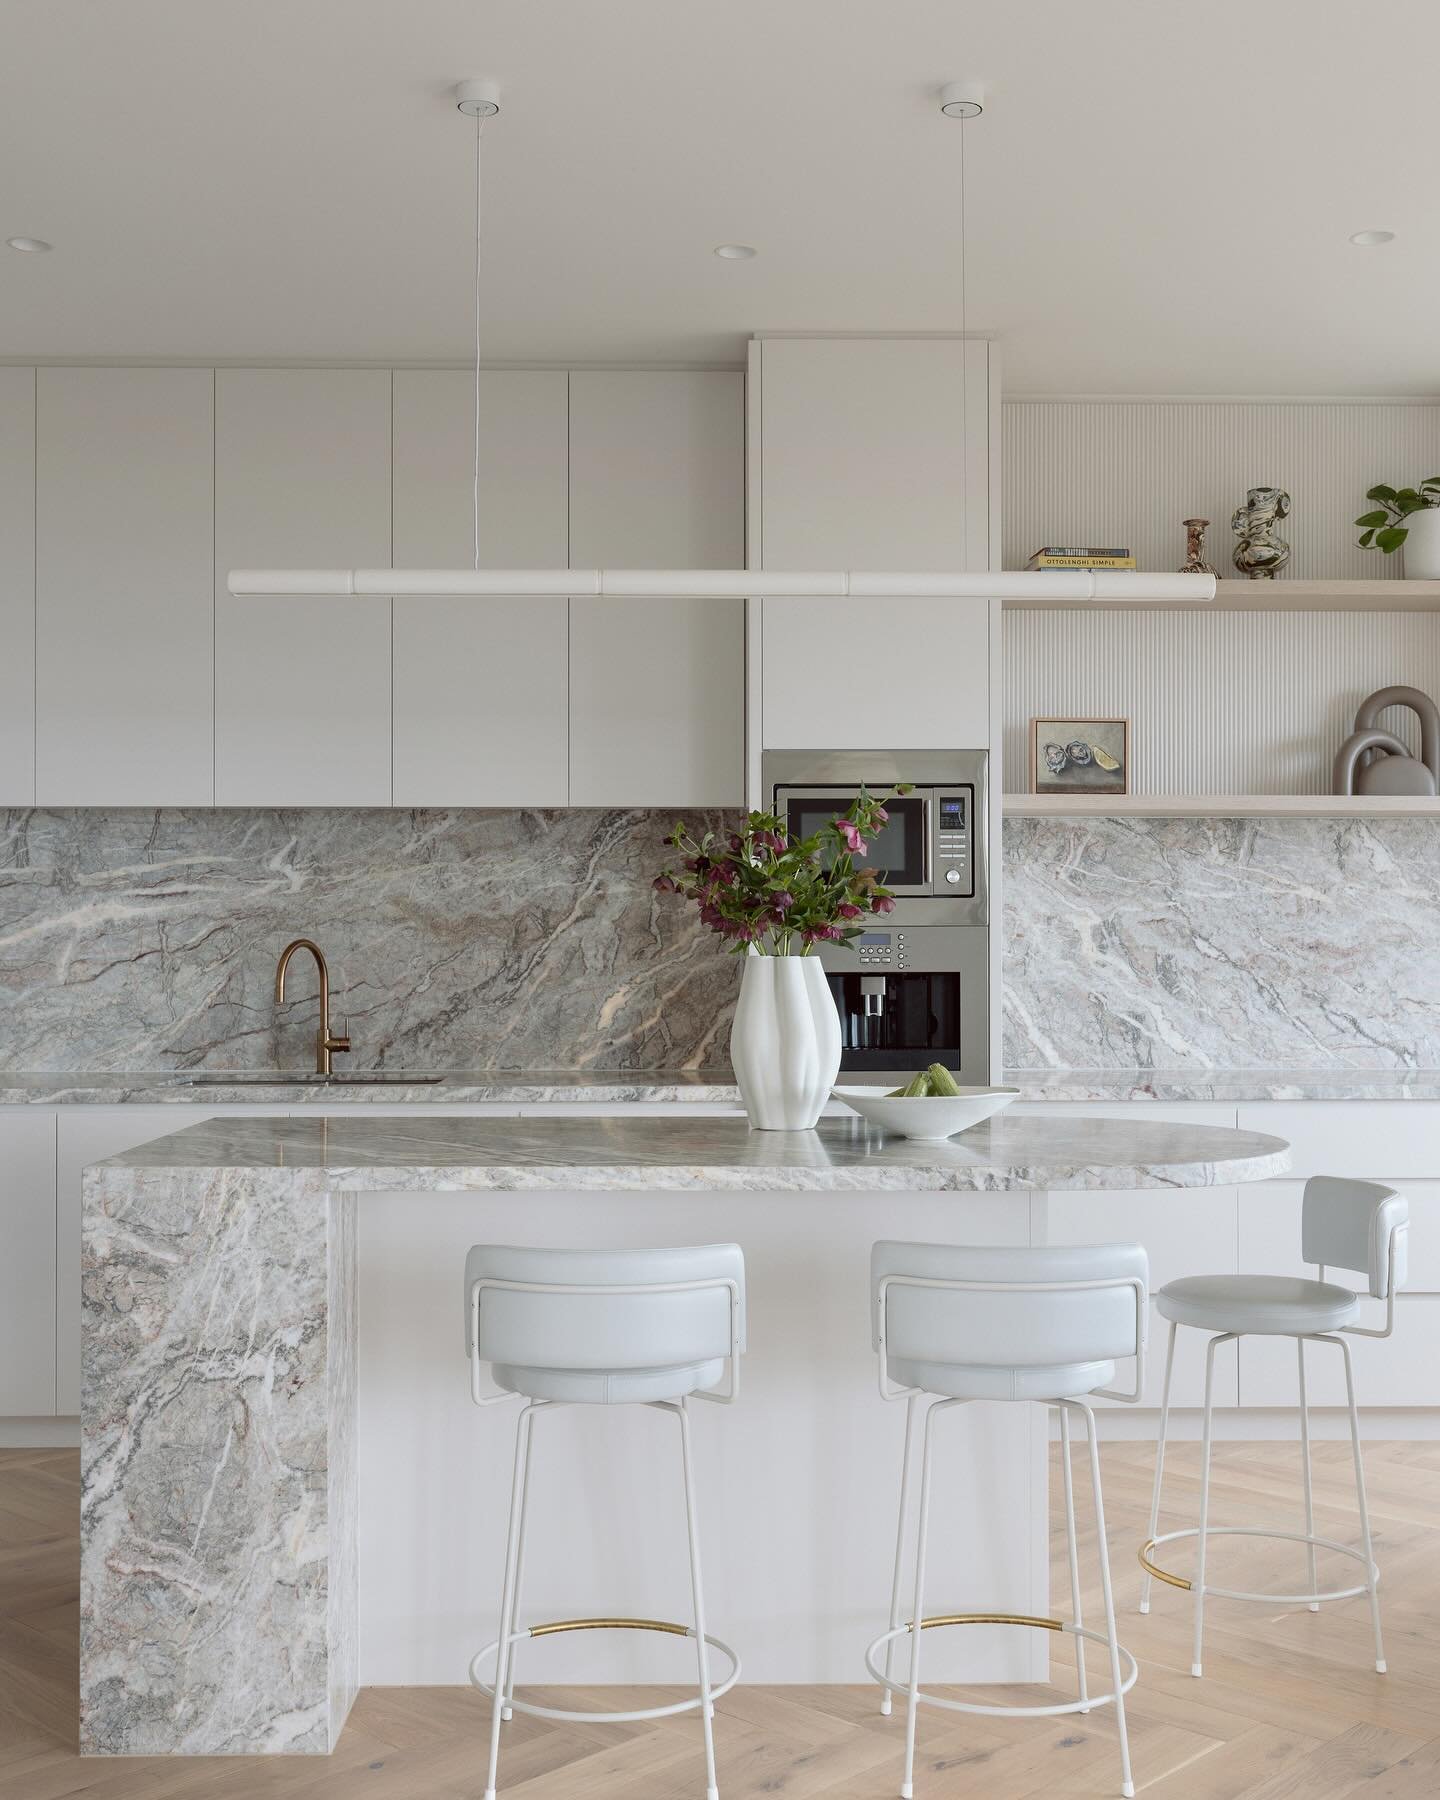 Extending the kitchen beyond the central column housing the microwave and coffee machine created a more harmonious and unified space, providing a beautiful, functional backdrop.

The striking Fior di Pesco marble on the benchtops, splashback, island 